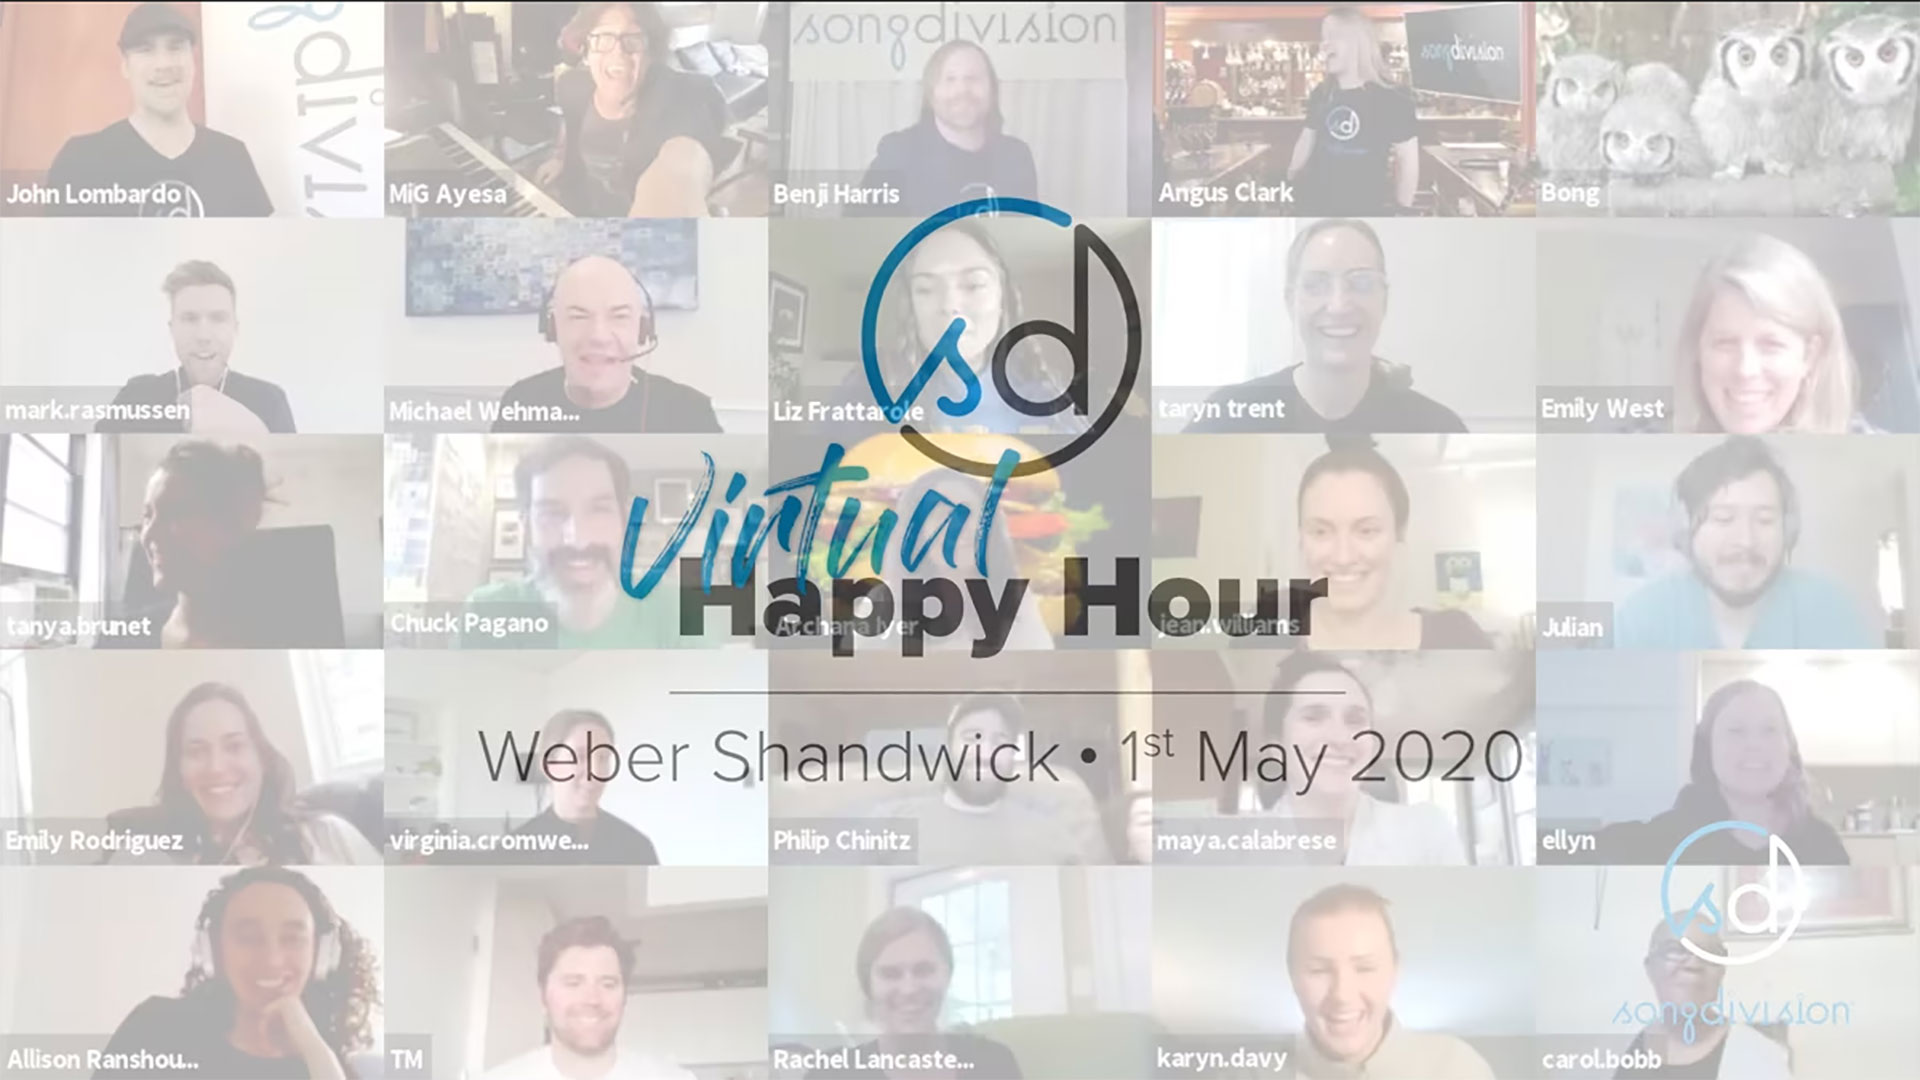 Weber Shandwick: Virtual Happy Hour with SongDivision